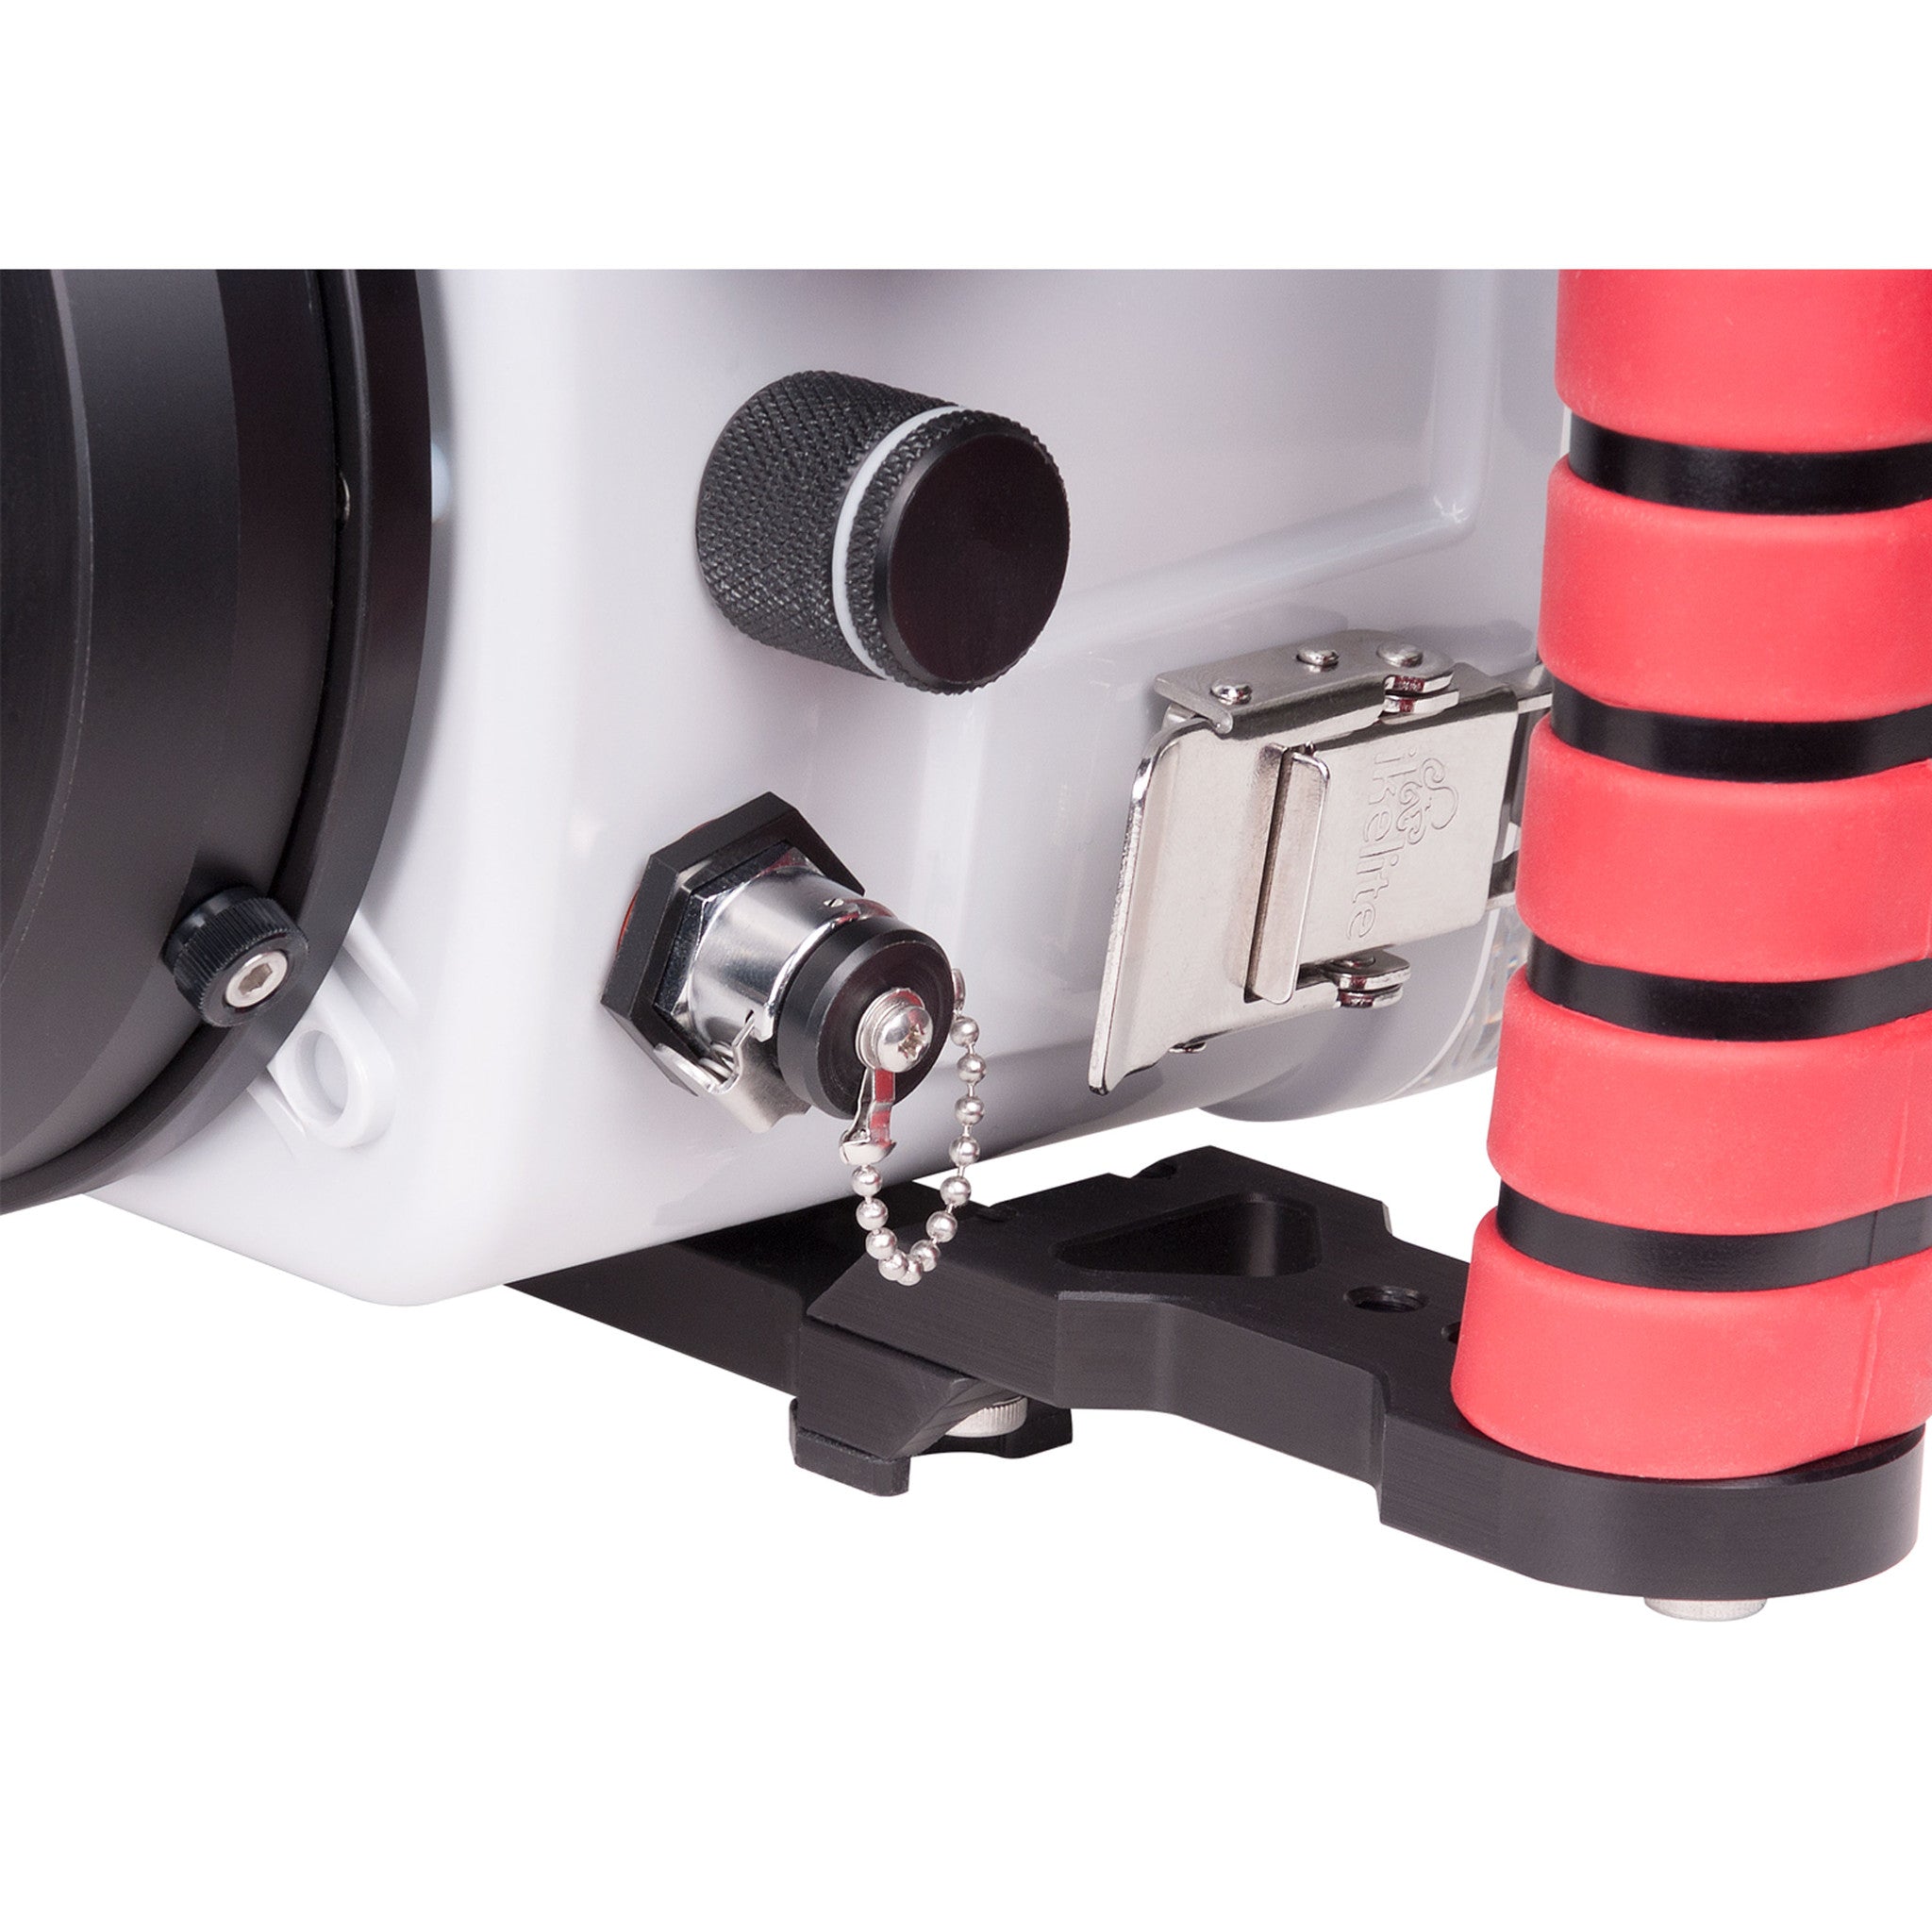 Vacuum Kit for 1/2 Inch Accessory Port and DSLR Top Mount